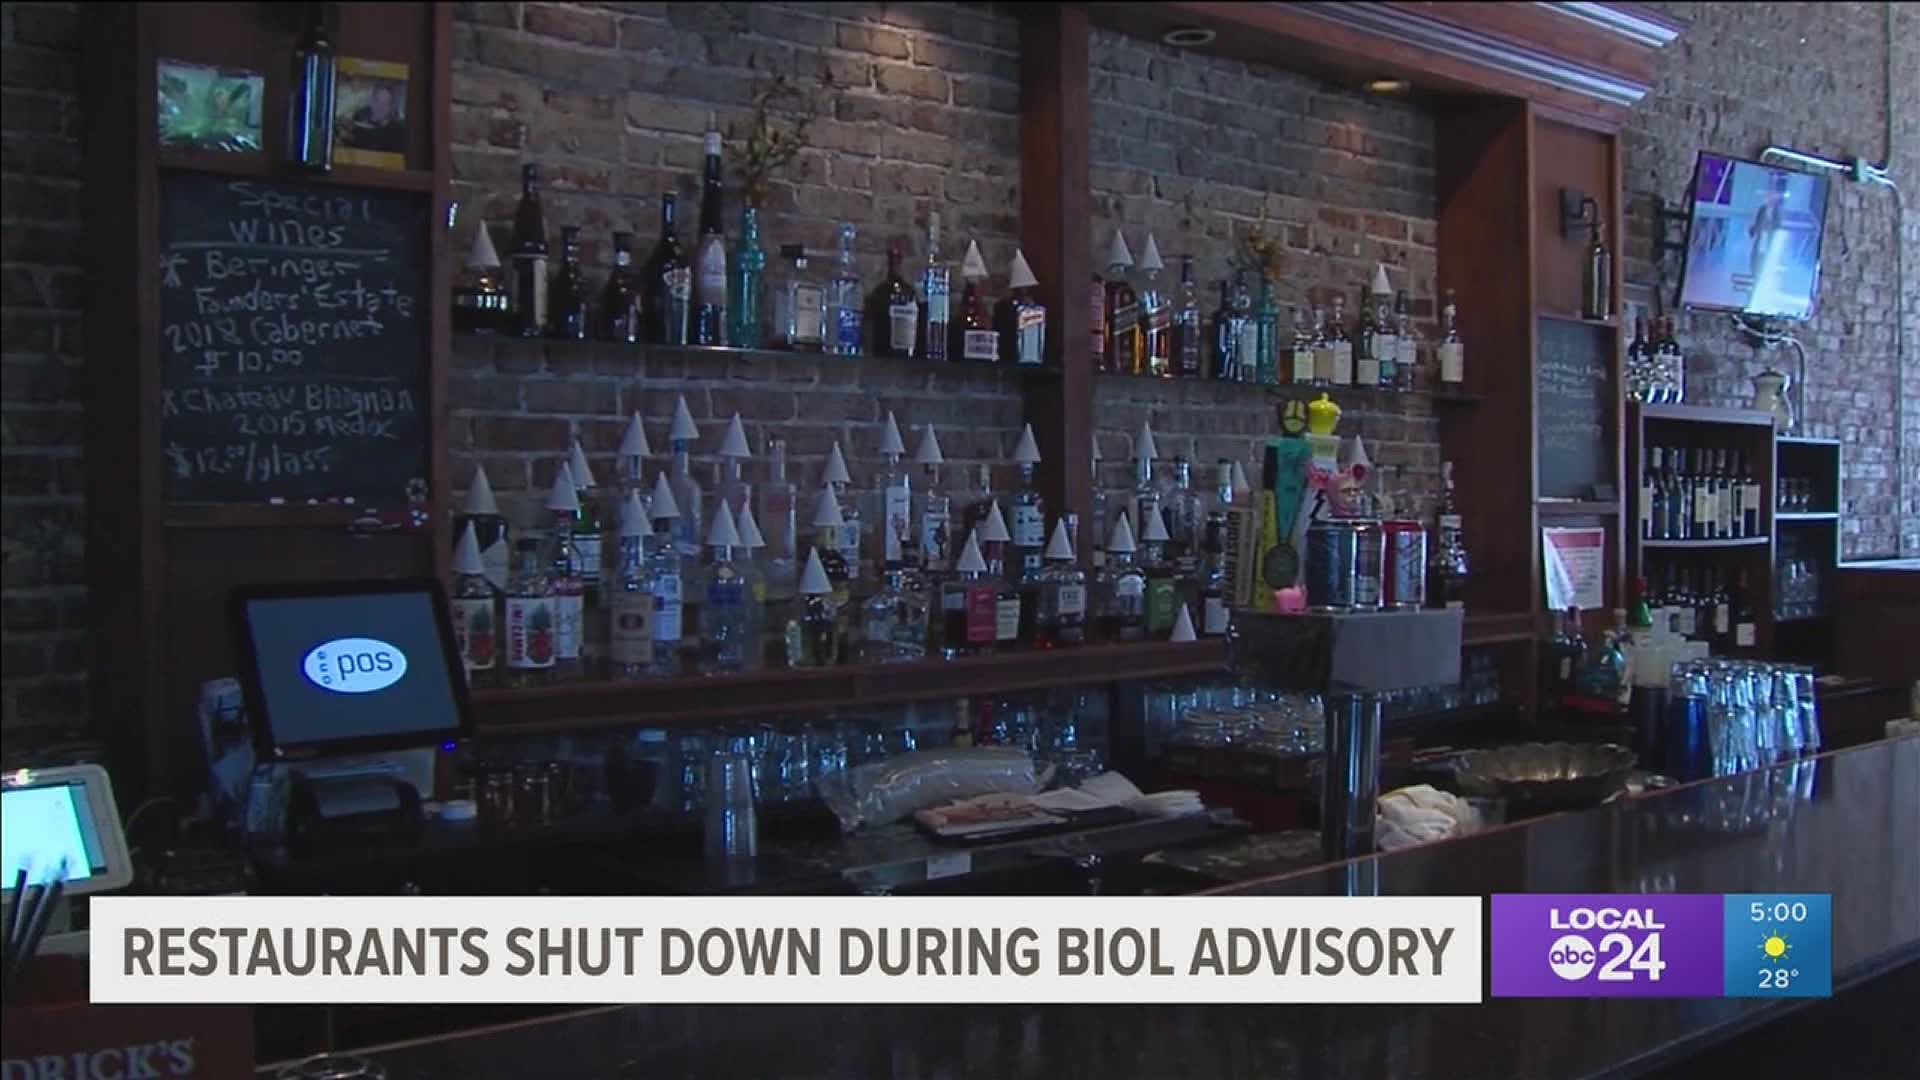 Restaurants who are MLGW water customers are impacted, and MLGW leaders are unsure when the advisory can be lifted.